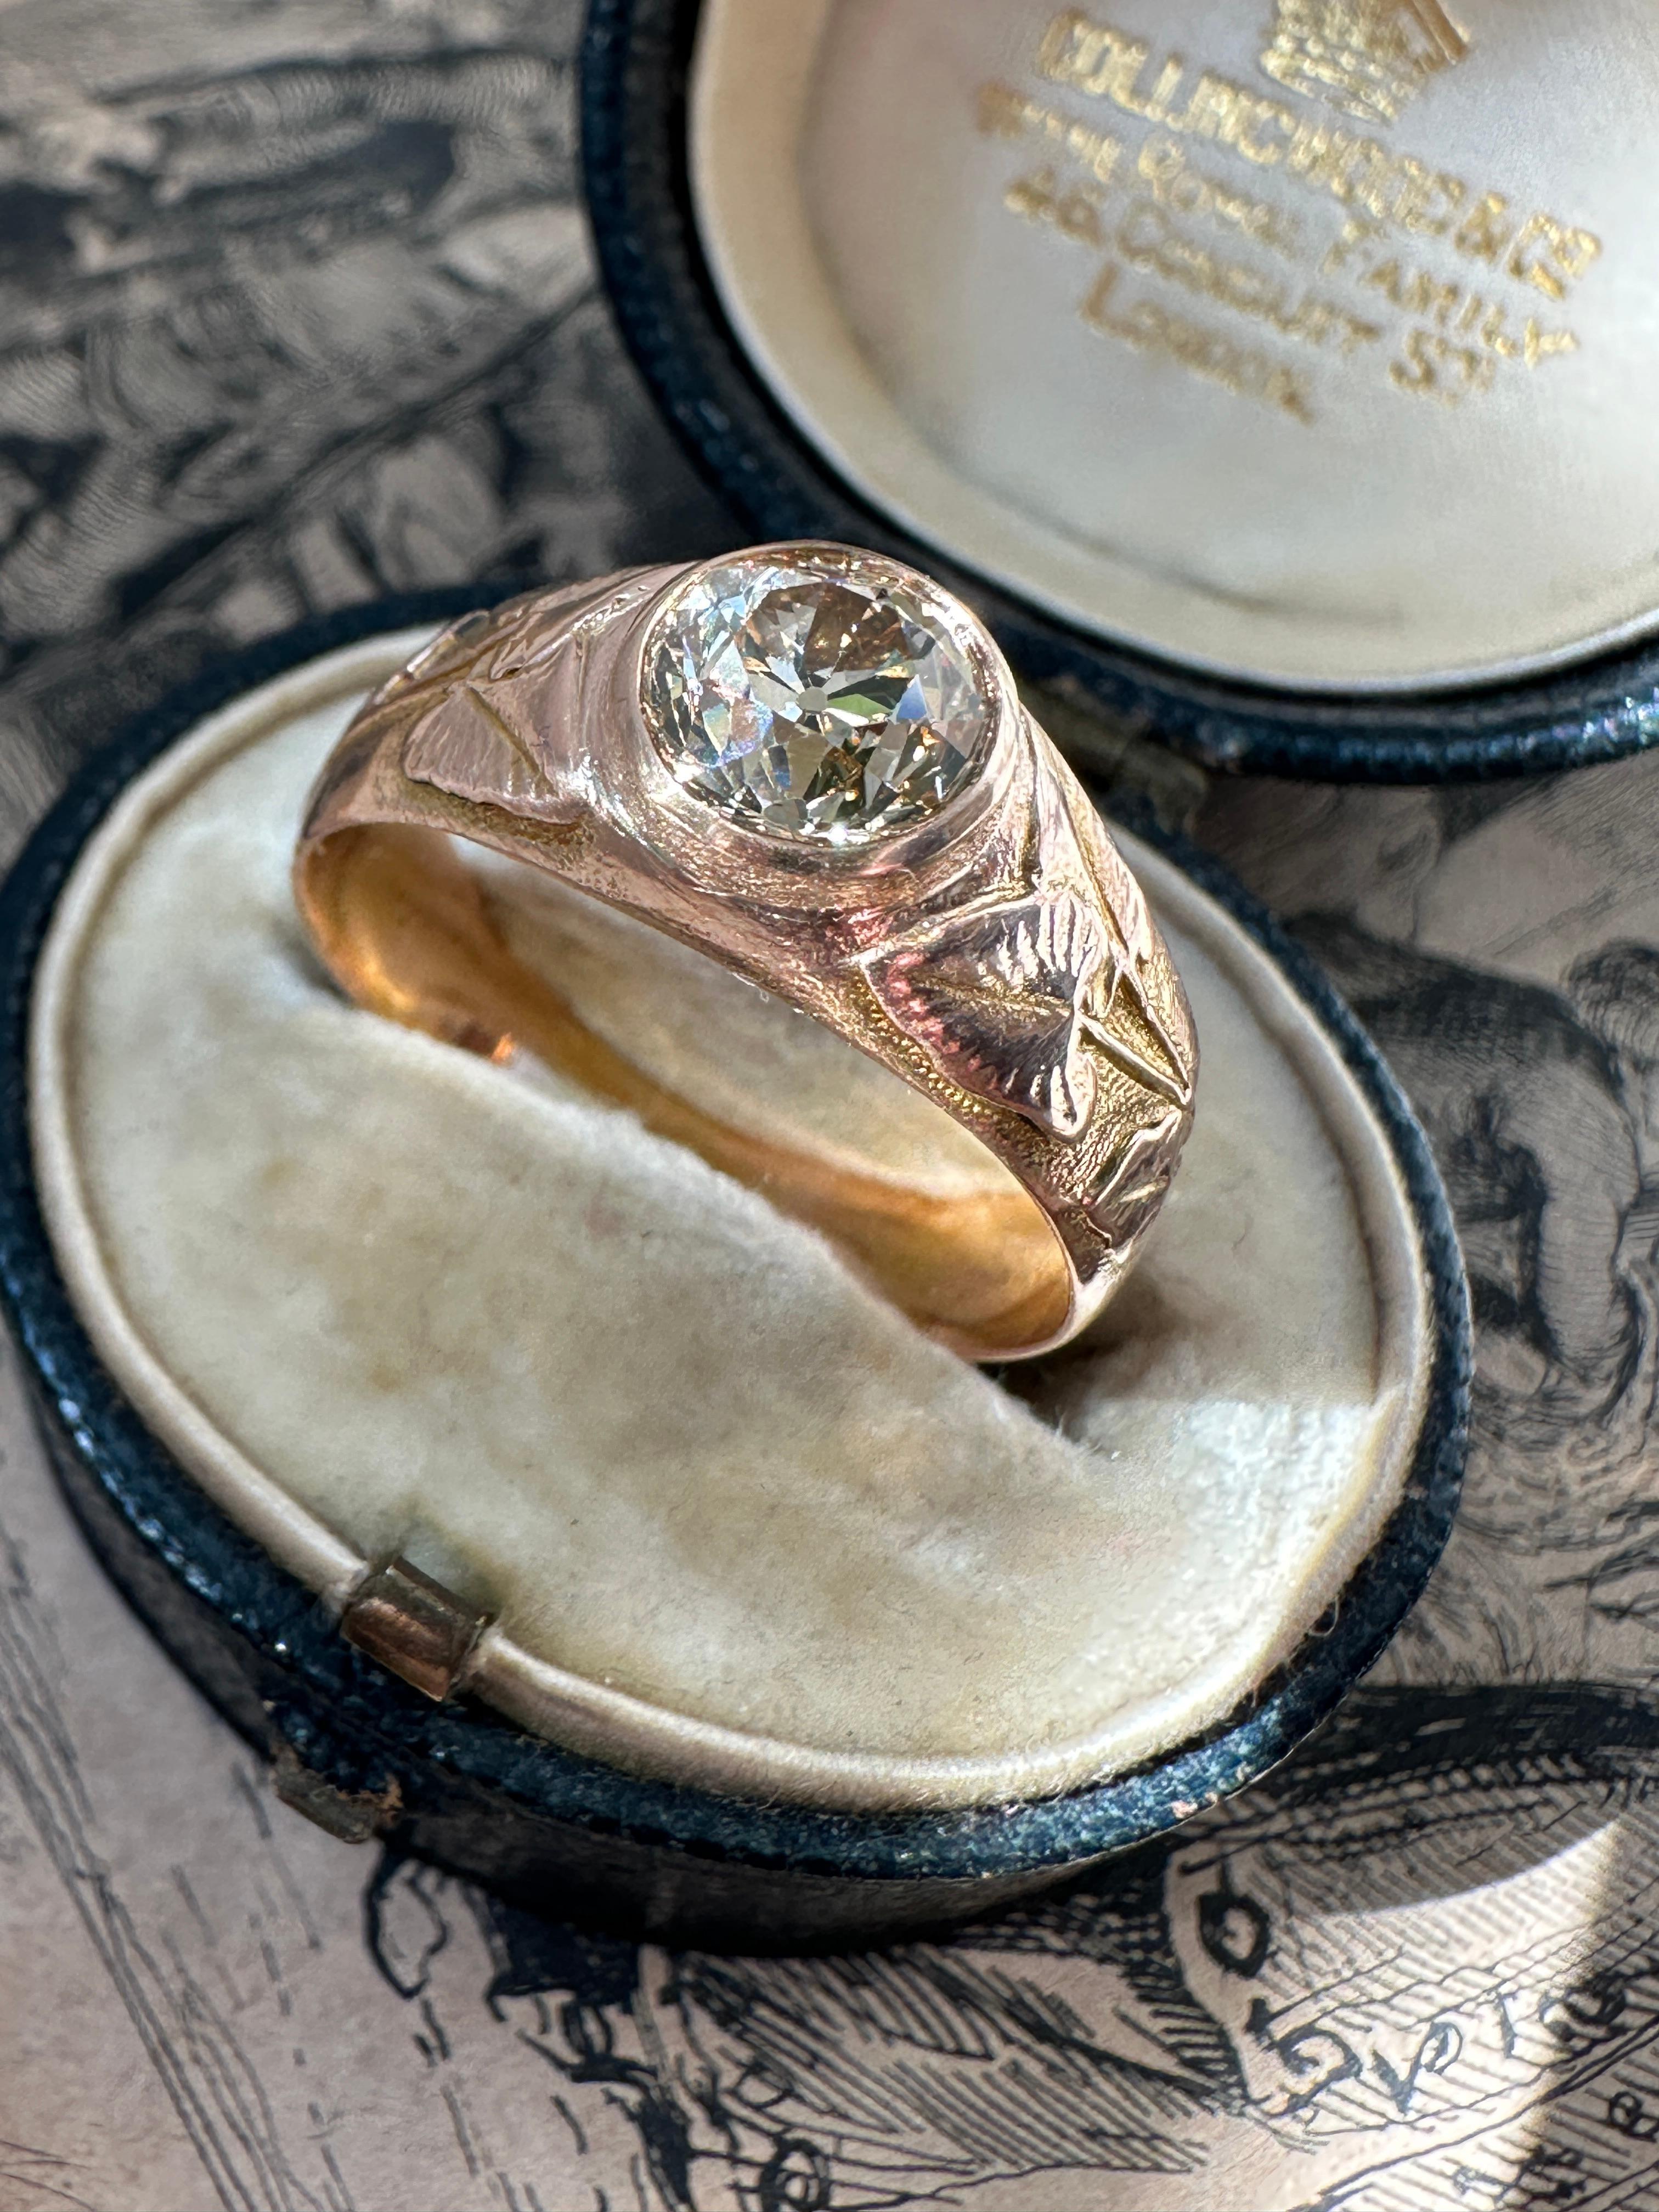 Dating to the turn of the 20th century Russia, a golden light brown 1.29 carat cushion cut diamond radiates from between calla lilly embellished shoulders. Finely fabricated in a burnished 14 karat rose gold. Currently a ring size 9. Accompanied by